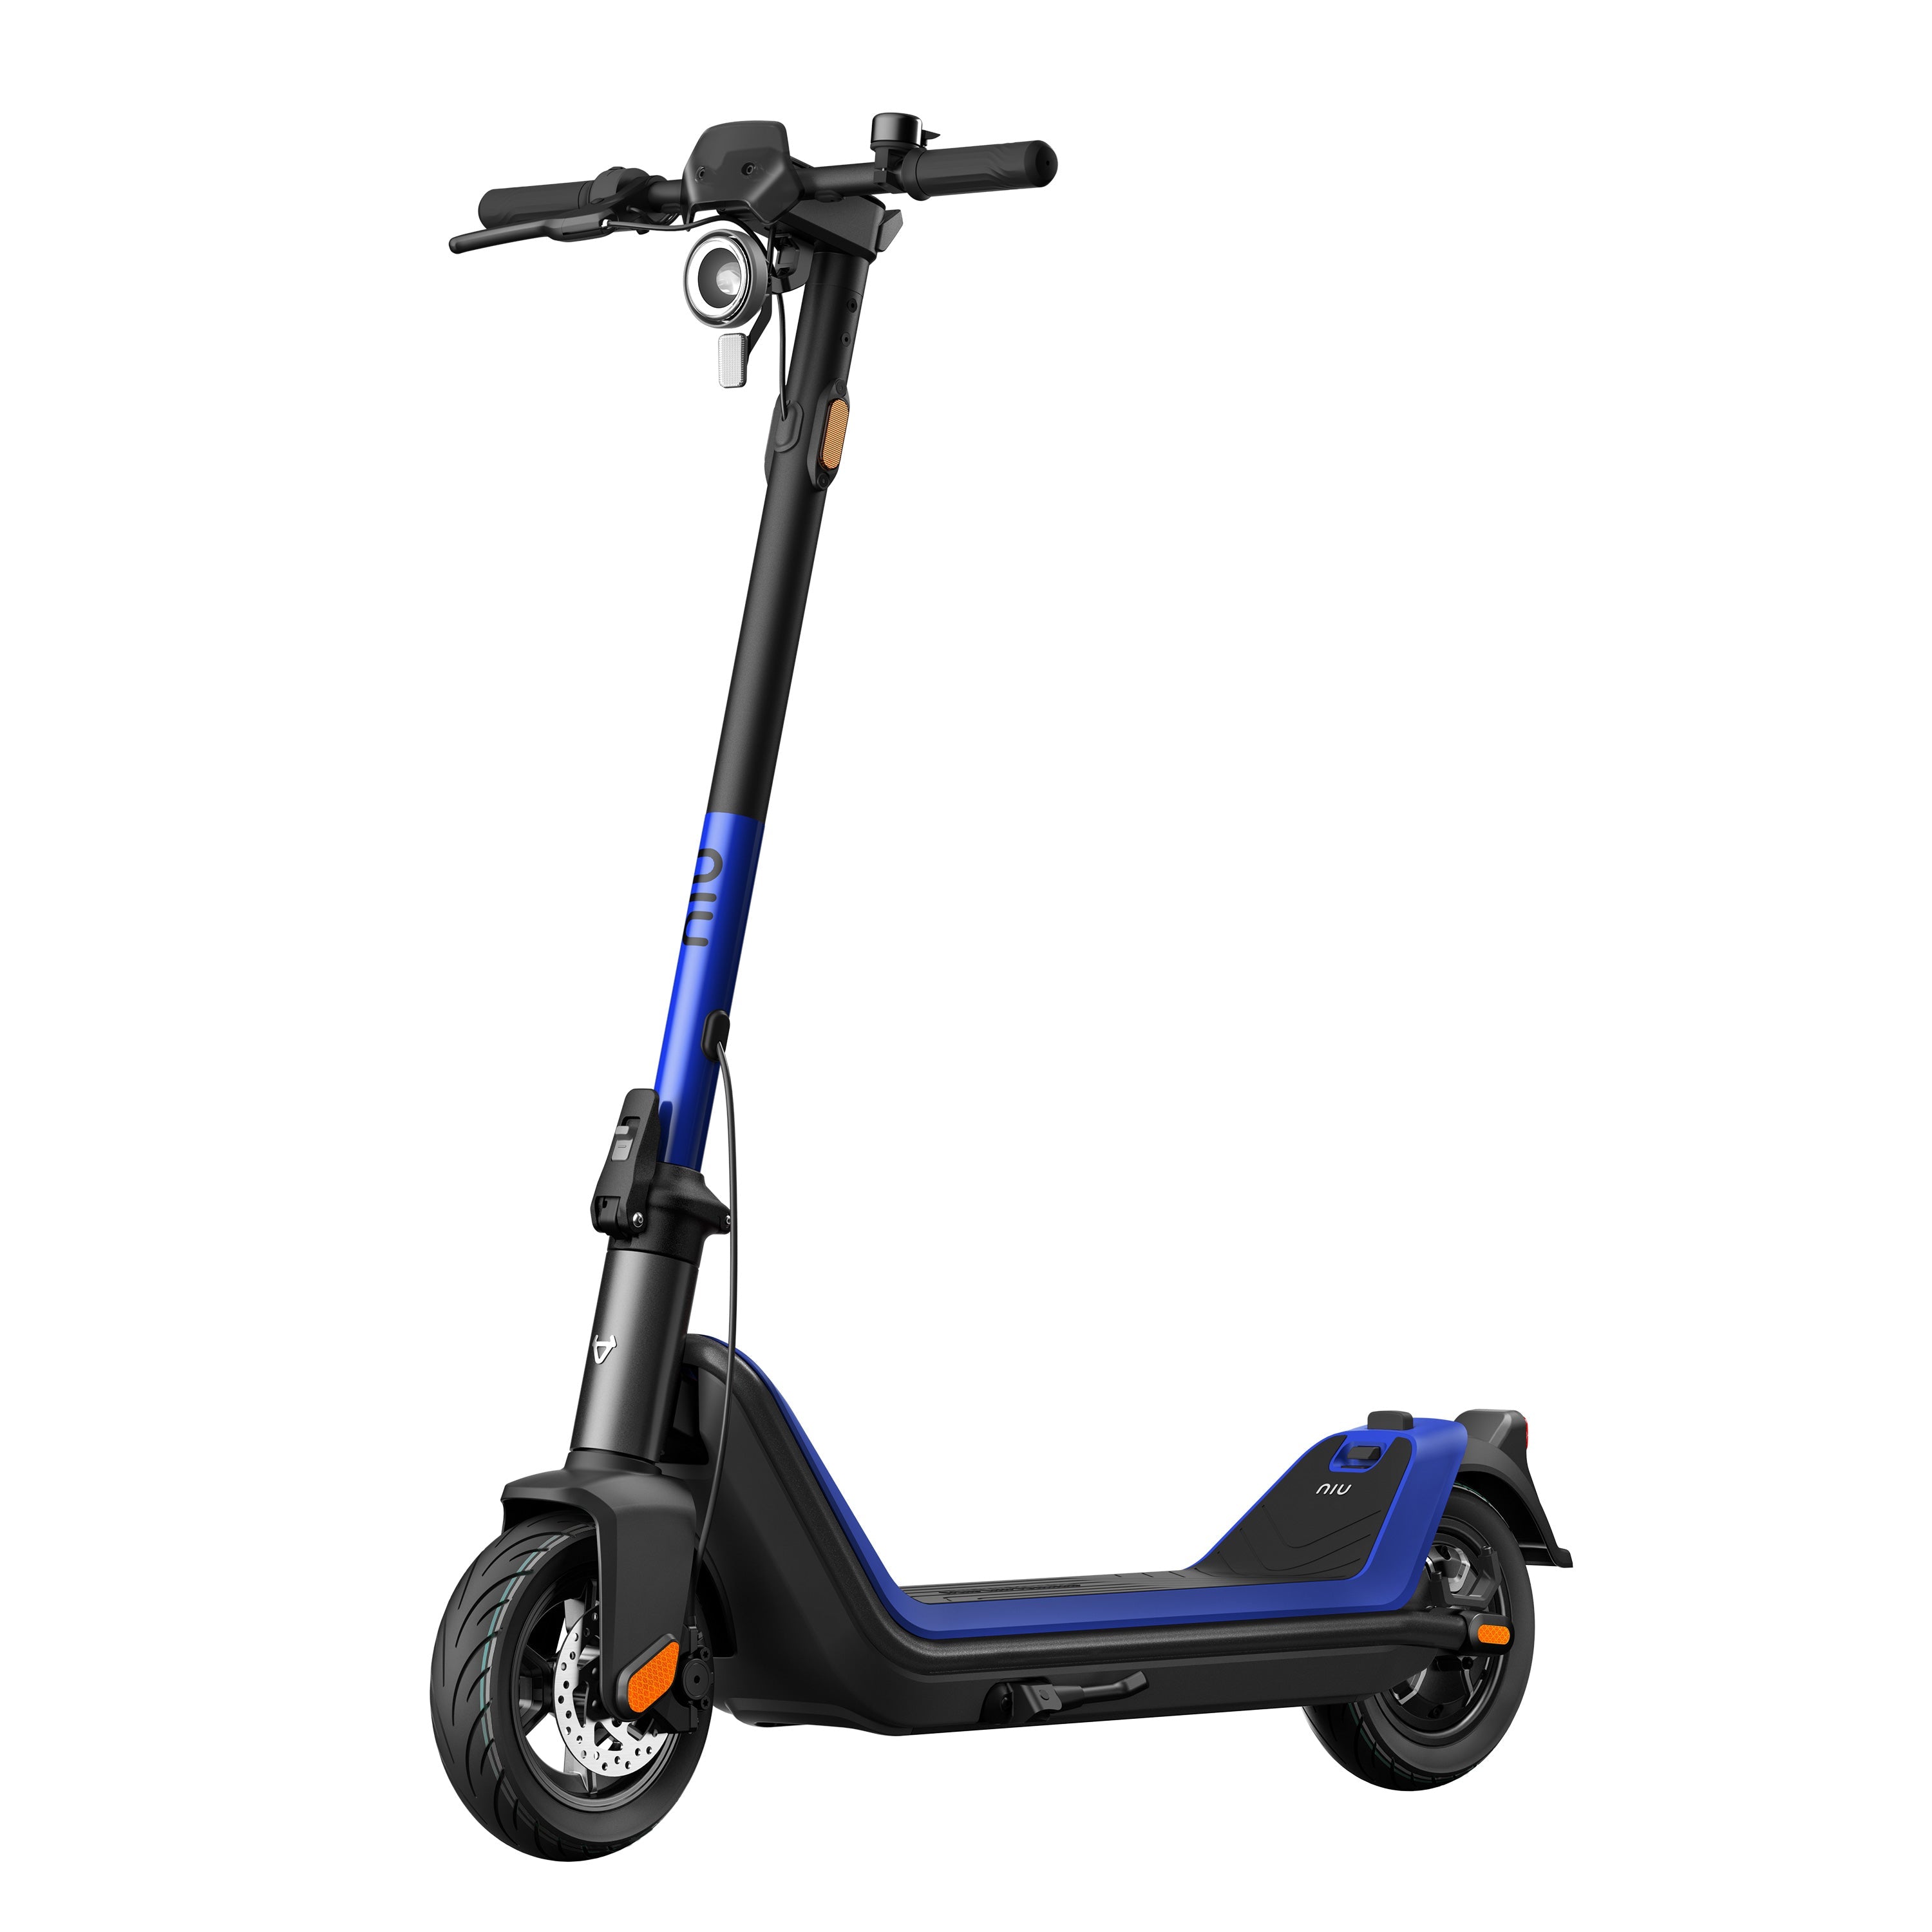 NIU KQi3 Sport Electric Kick Scooter for Early Eagle